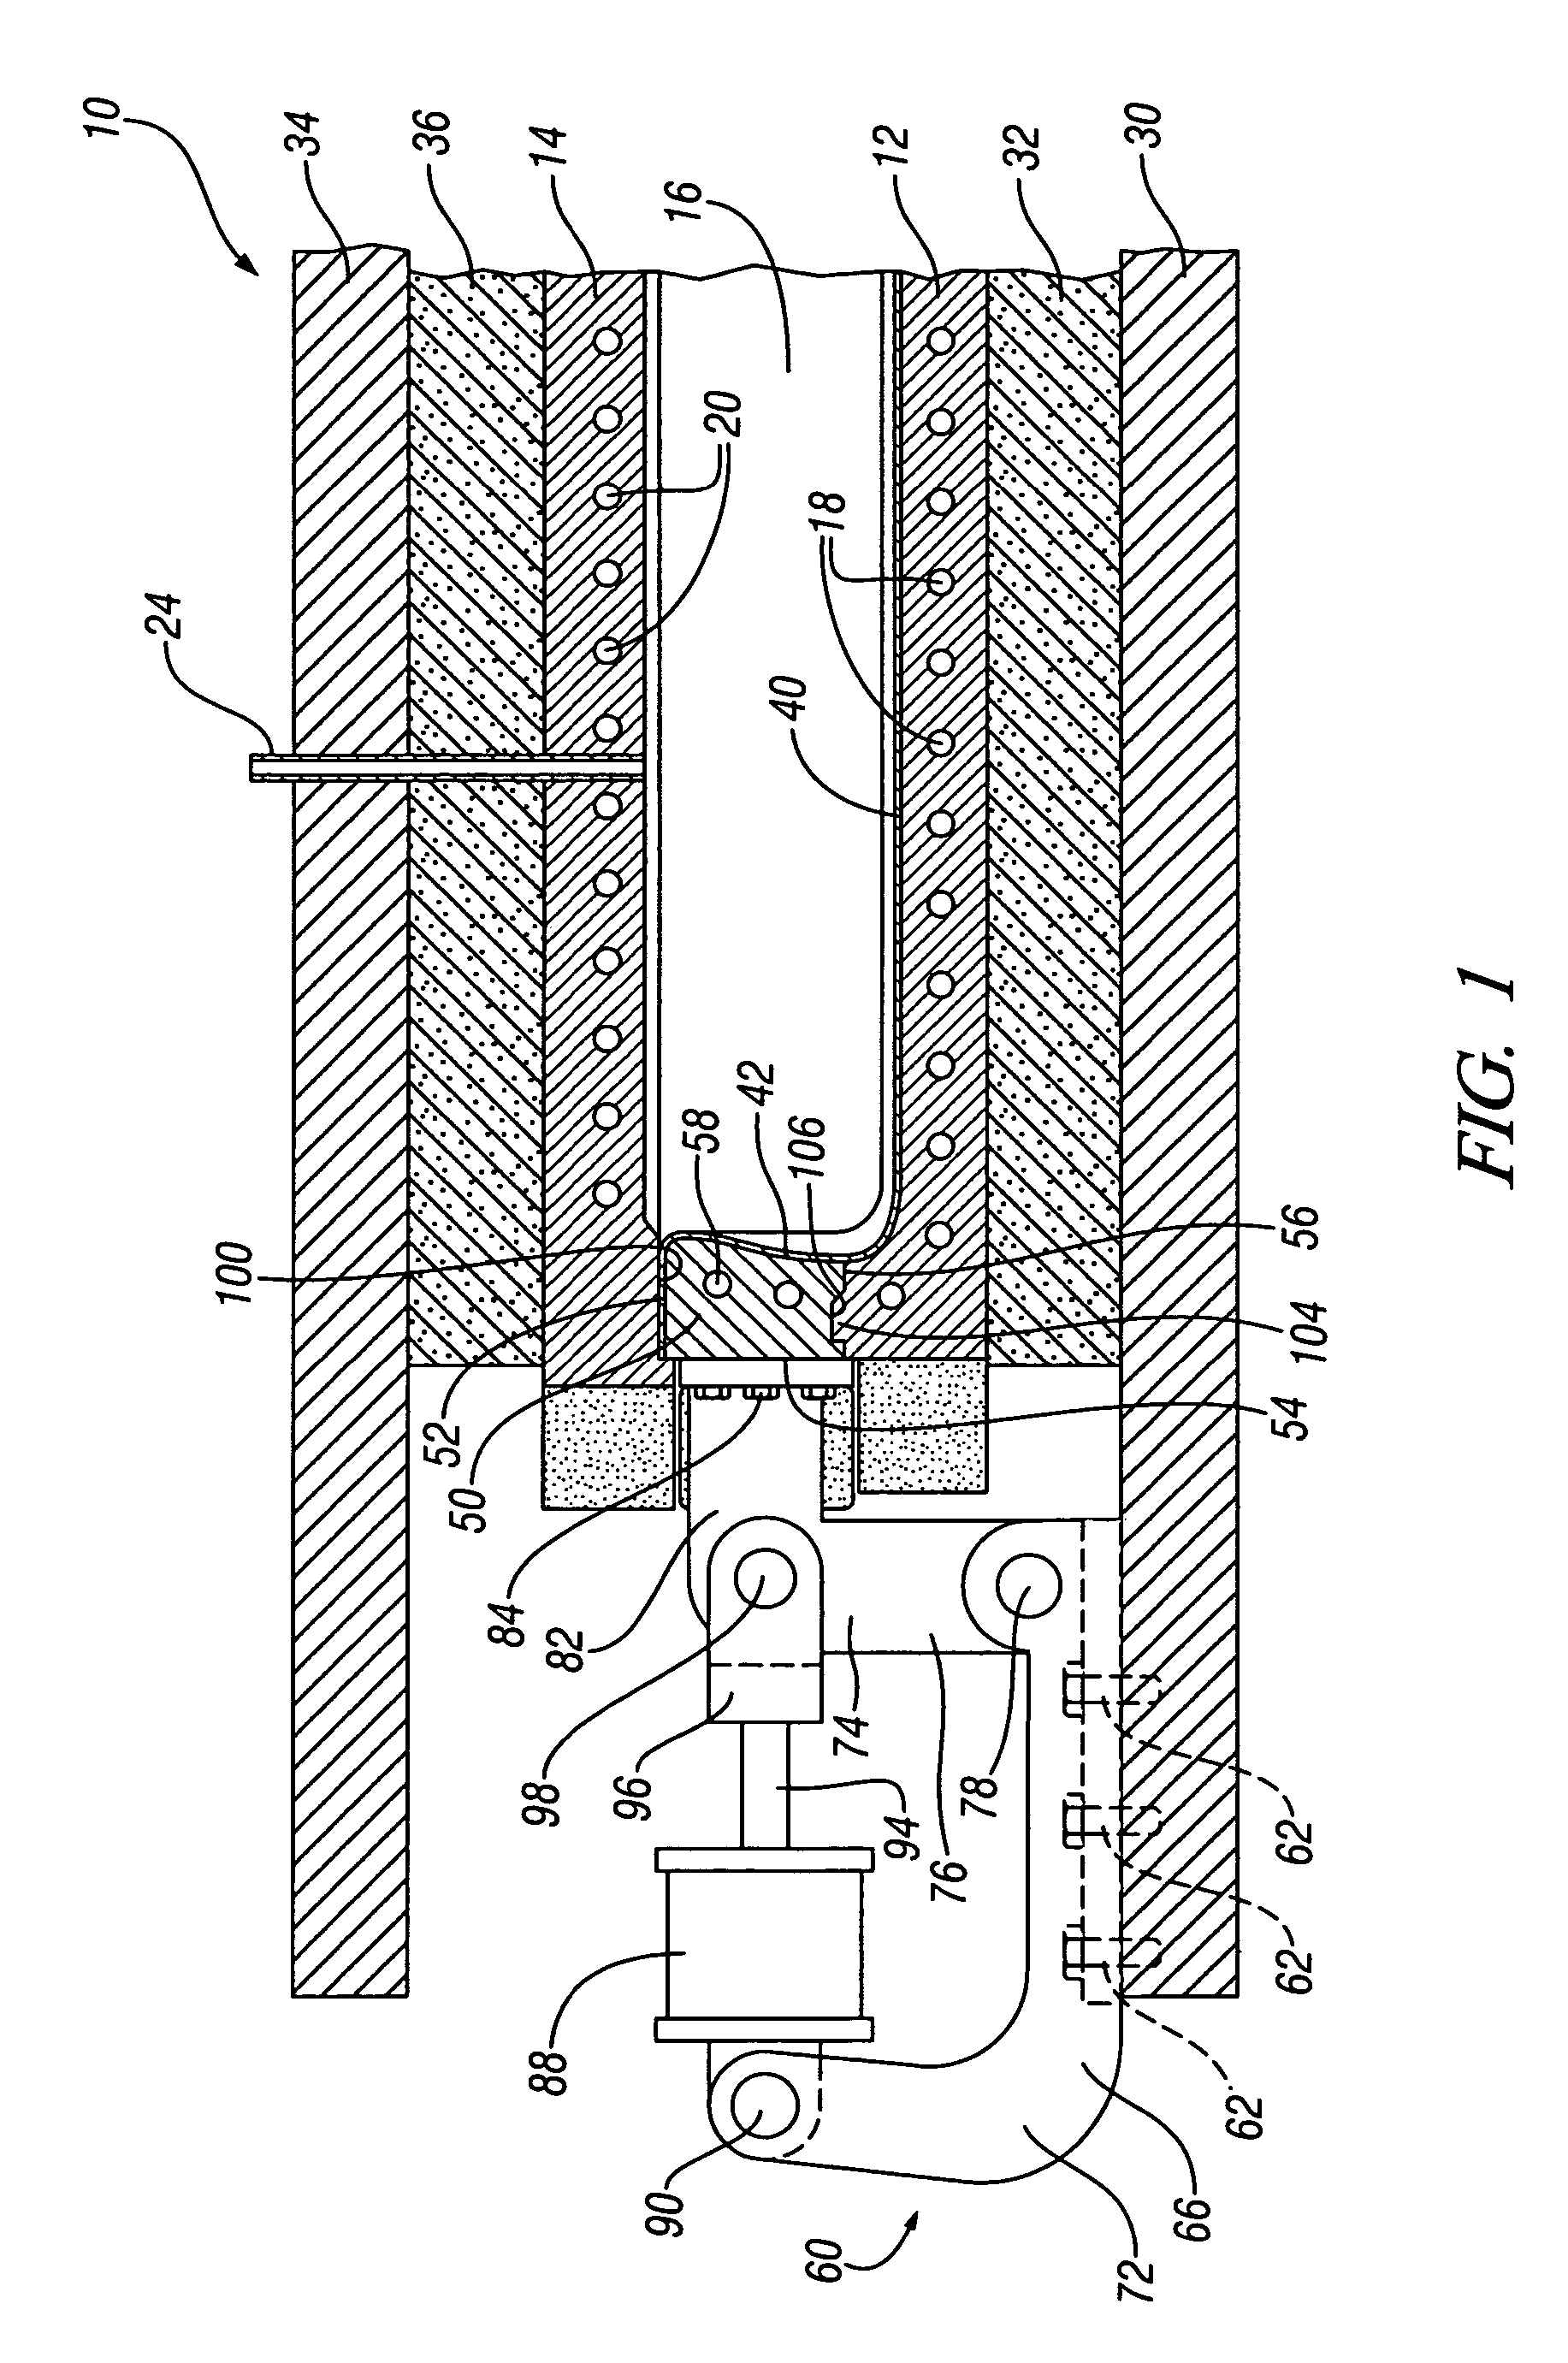 Forming tool apparatus with pivoting wall segment